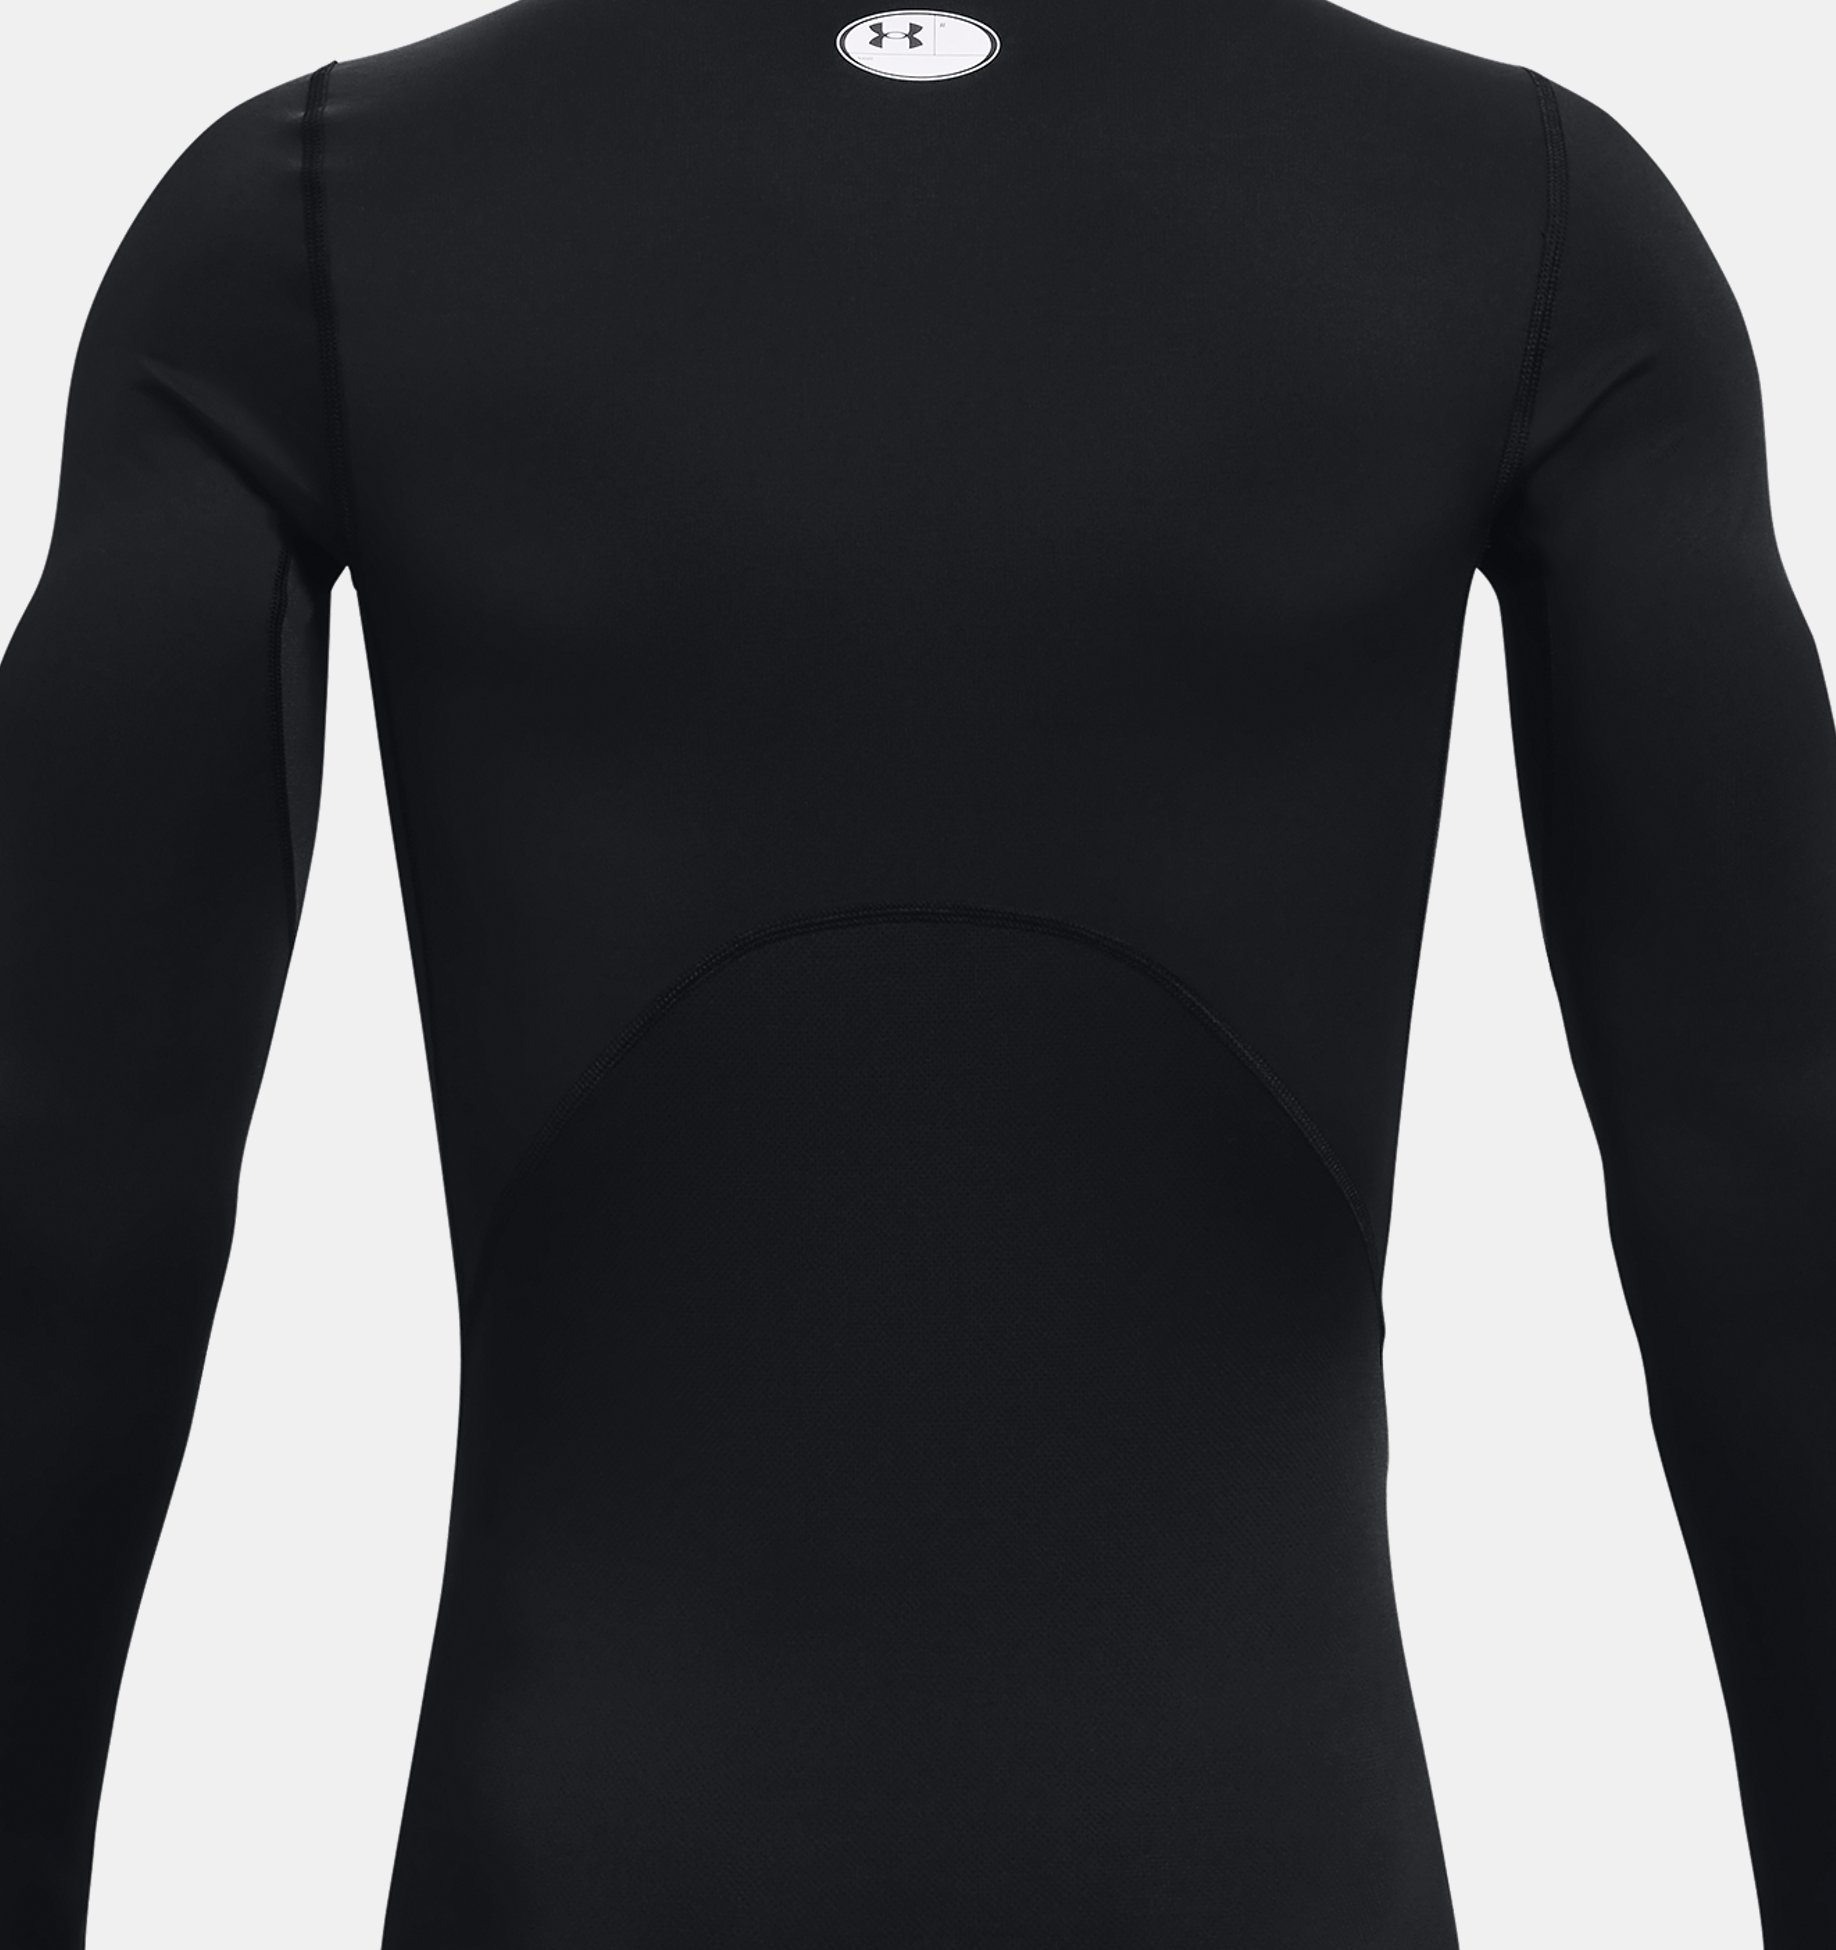 Keep warm in the coldest conditions with Under Armour ColdGear with the  Mock Turtle Neck